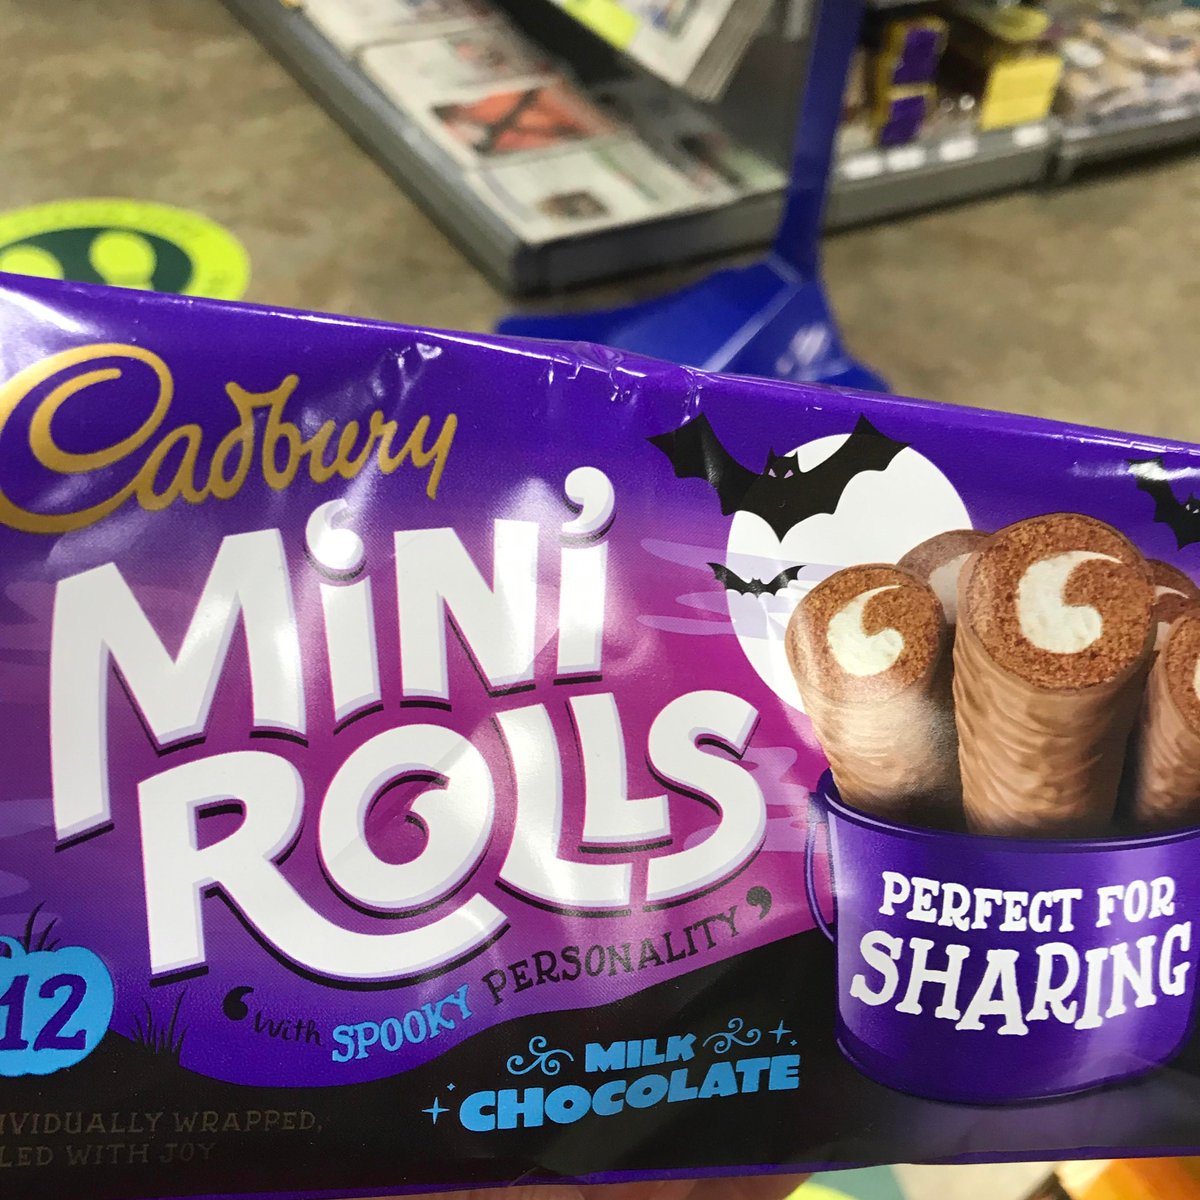 CADBURY MINI ROLLSEven by the rock-bottom standards of spooky products, this is low-effort: no halloween change whatsoever to the appearance or taste. I see they've even put "with spooky personality" in inverted commas, presumably to get around trading standards. Disgusting /5